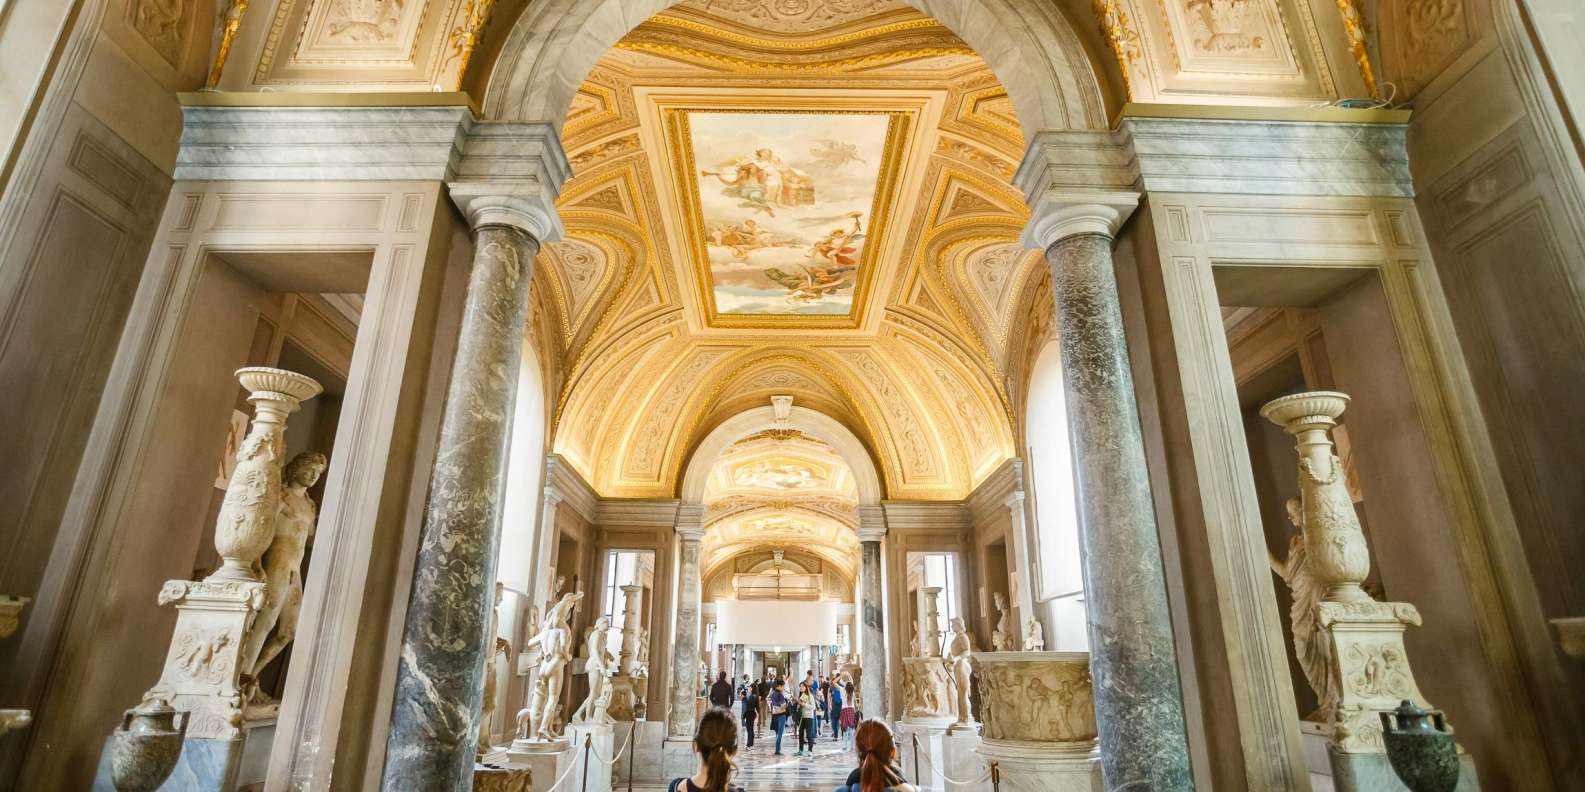 A Comprehensive Guide to the Vatican Museums: Tickets, Highlights, and More